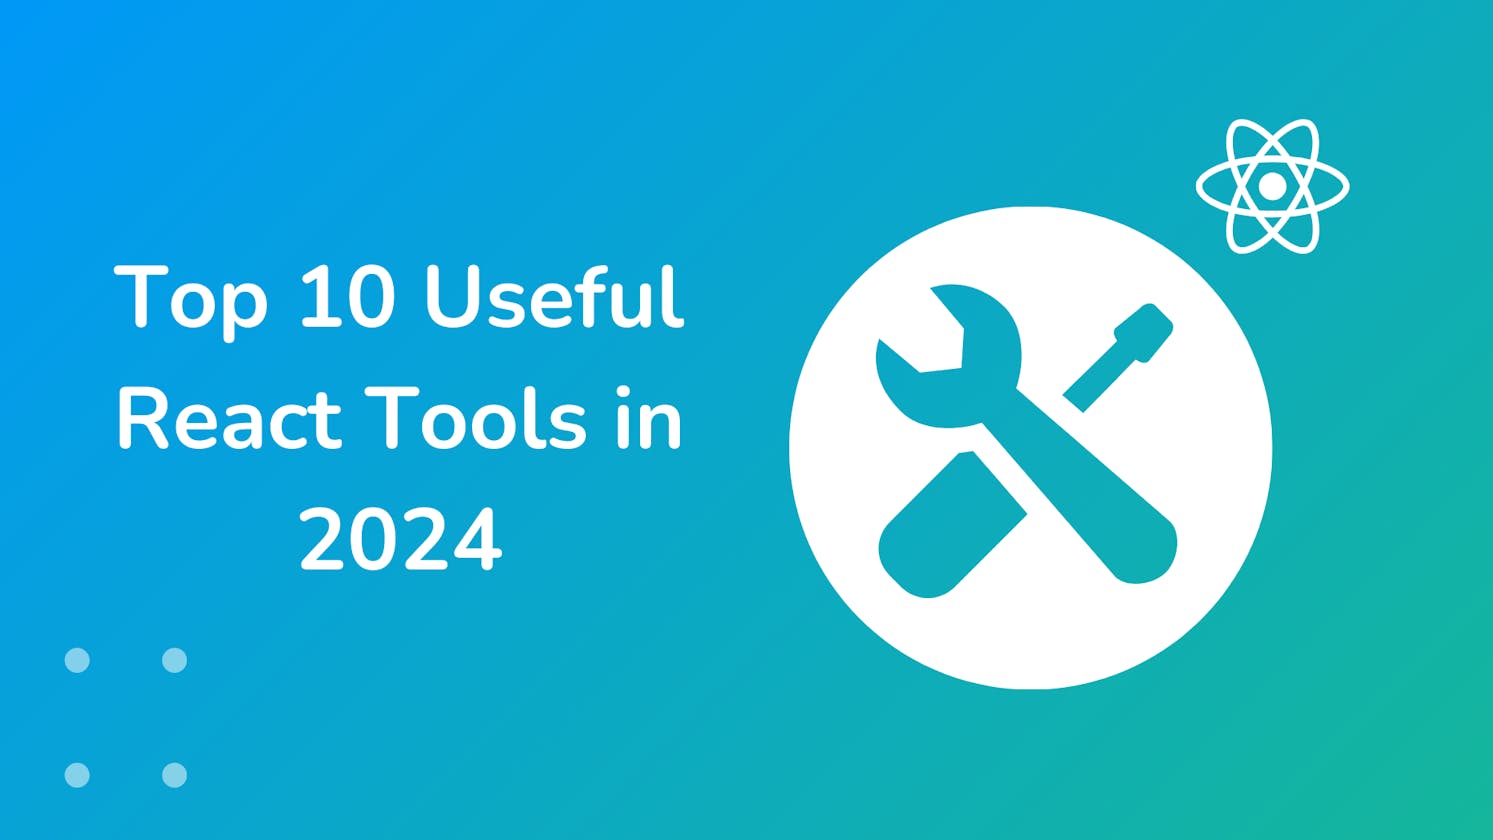 Top 10 Useful Tools to Boost Your React Project in 2024